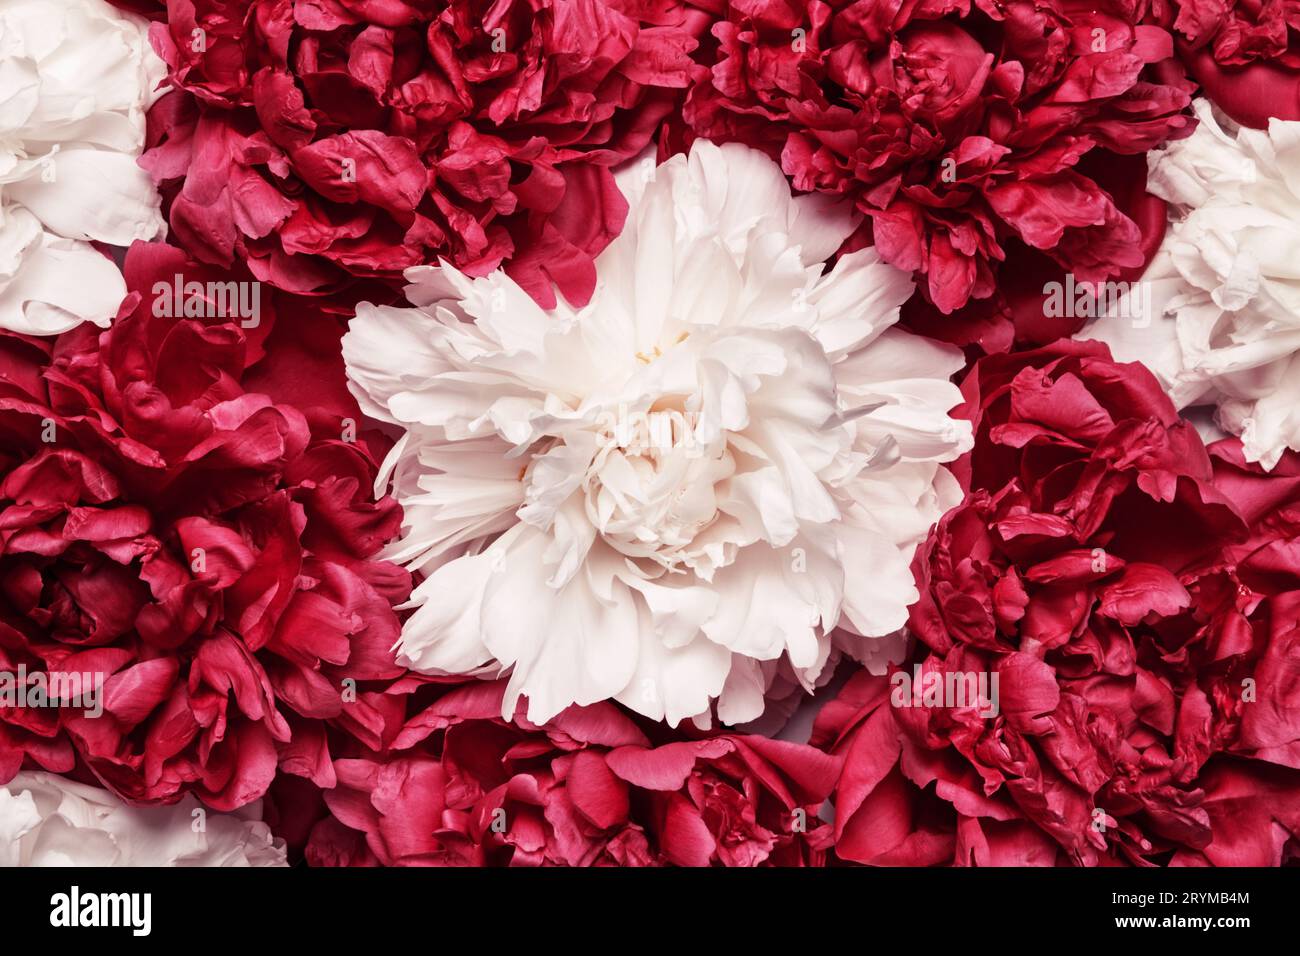 White and red peonies background. Beauty floral background. Festive flowers concept Stock Photo